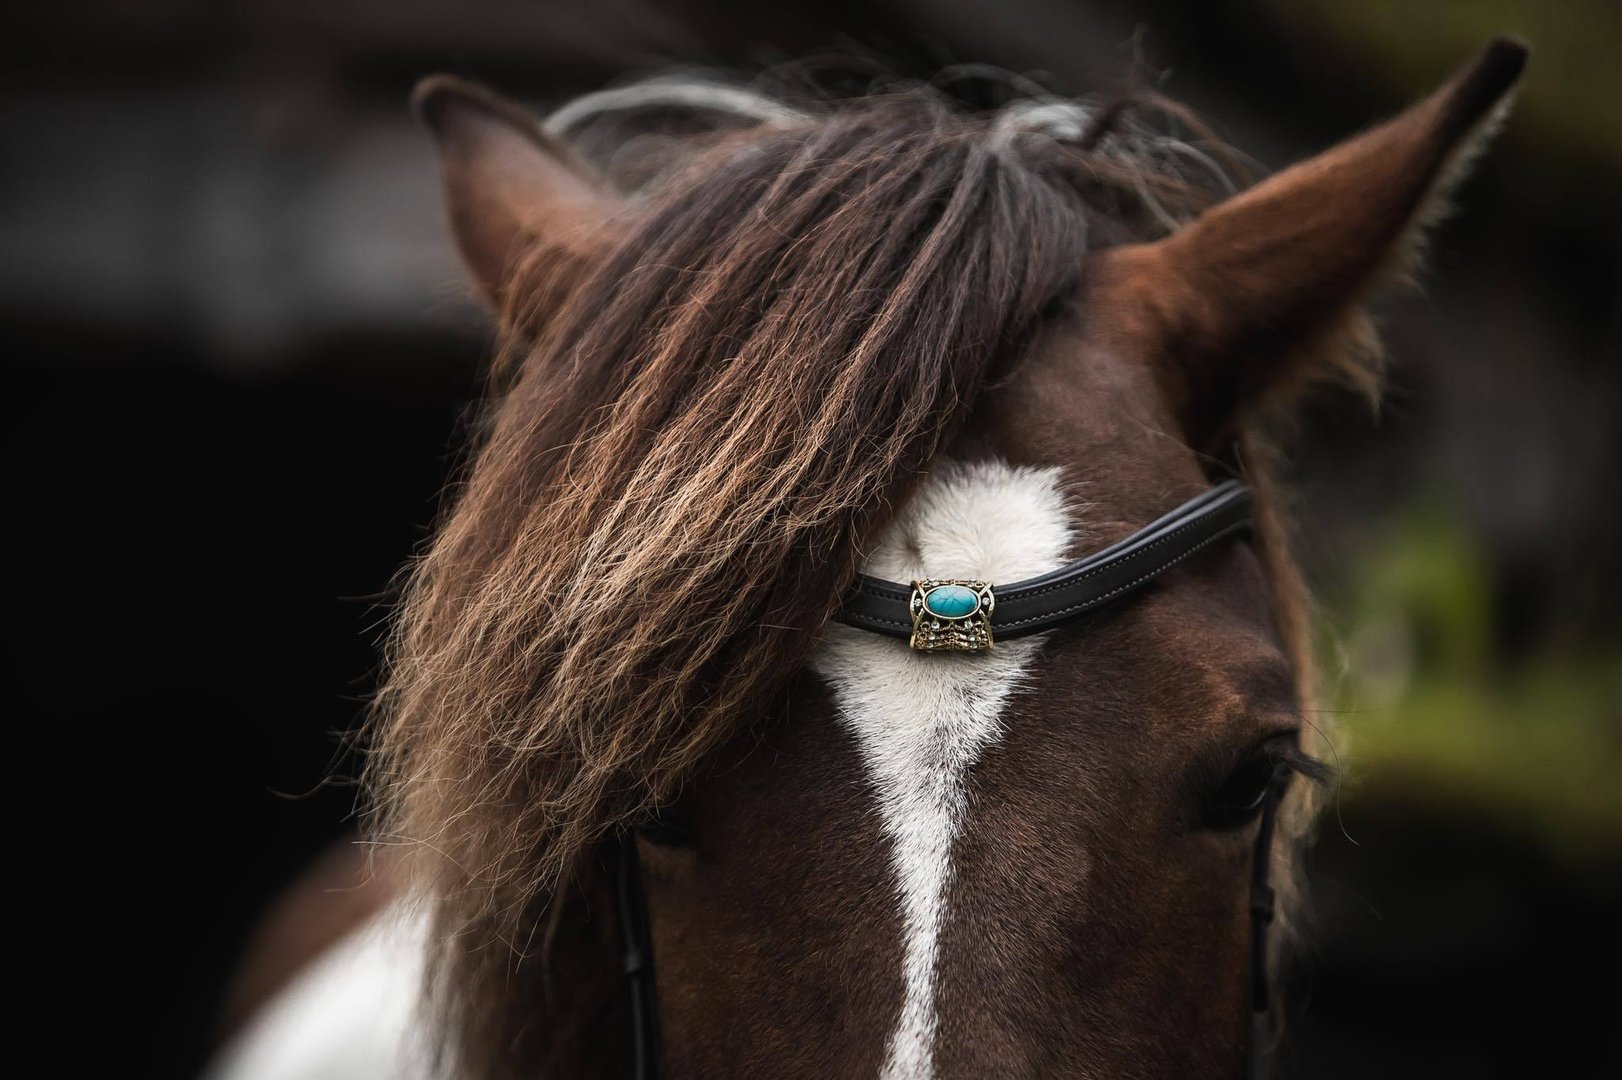 ES Browband "VALENTIN" Turquoise